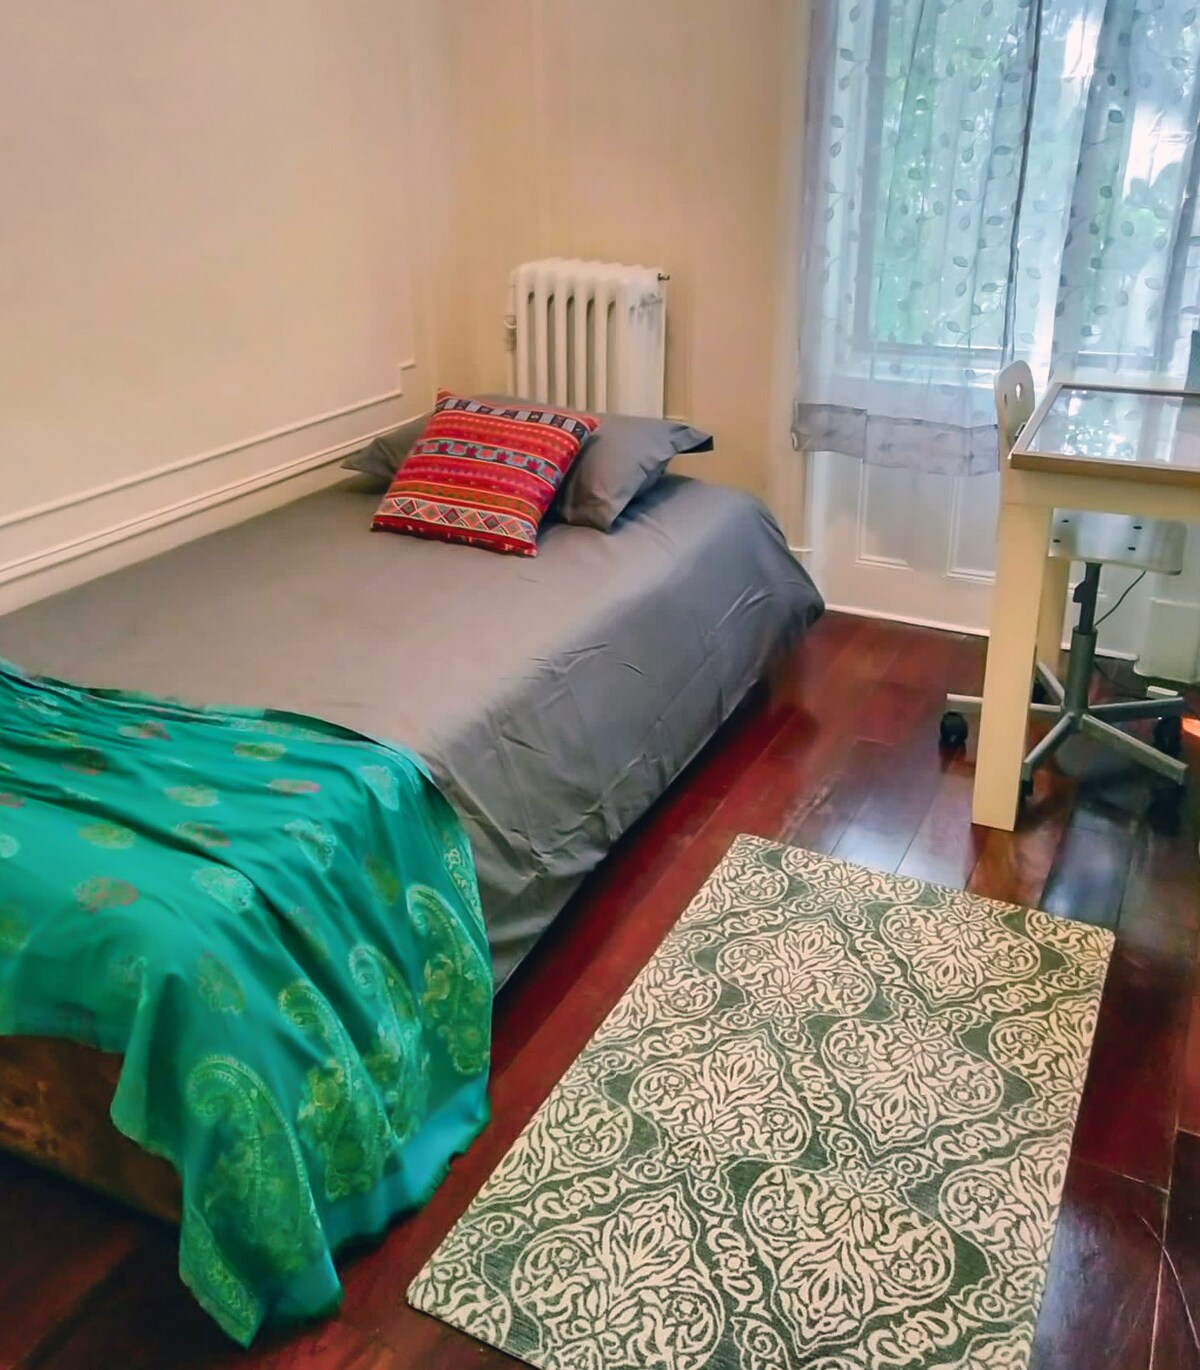 Bushwick Charming Room Great for Solo Travellers